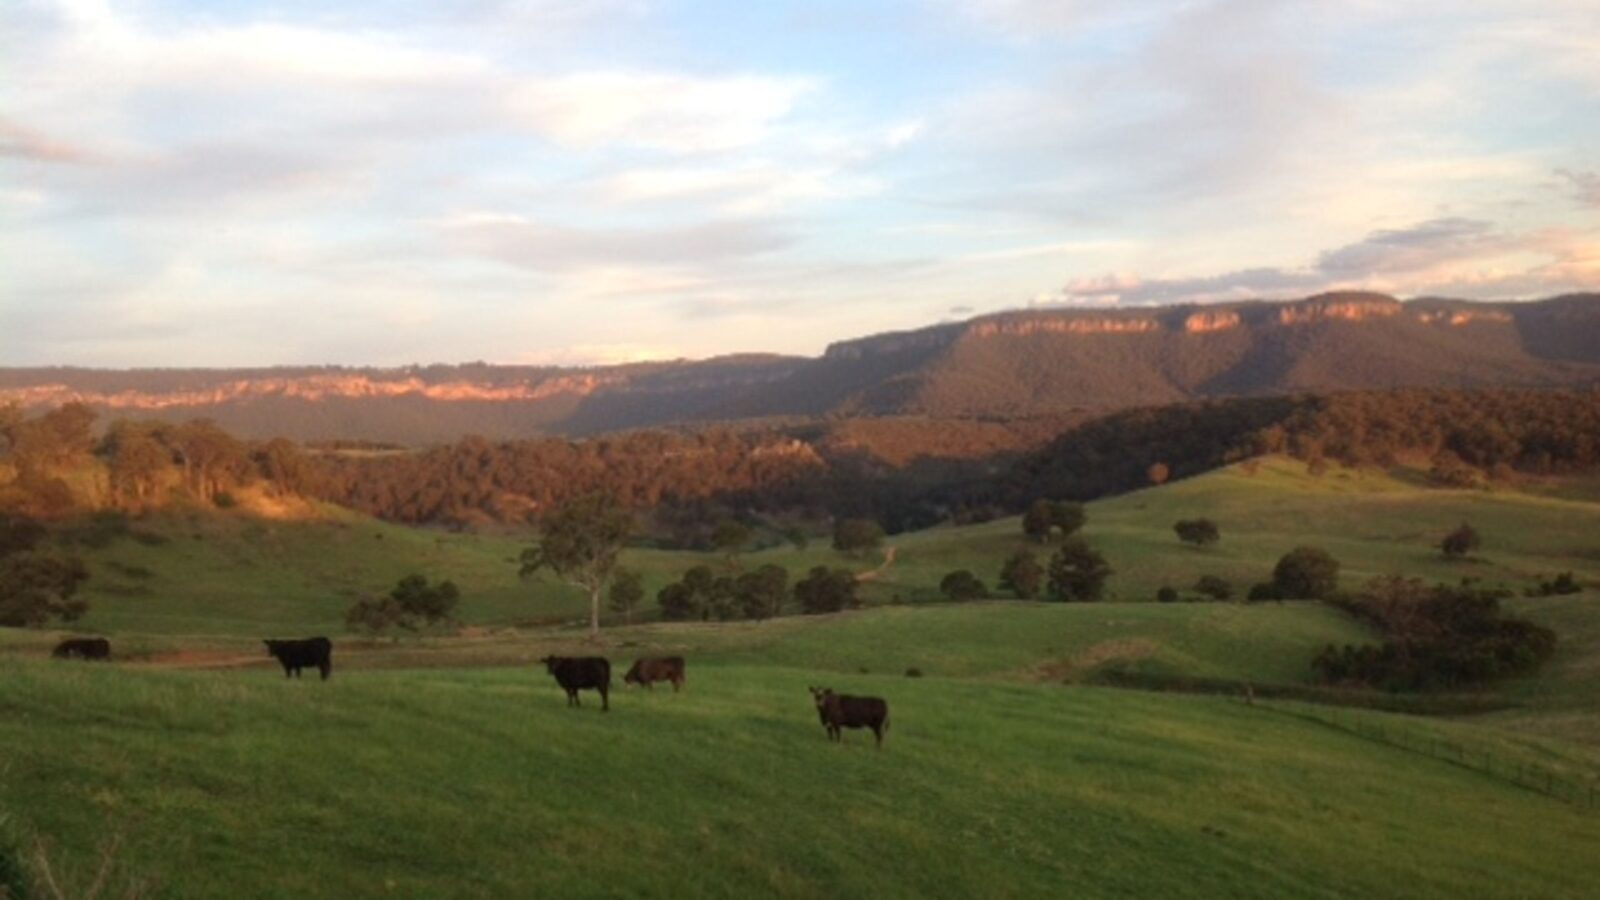 Cattle in the valley